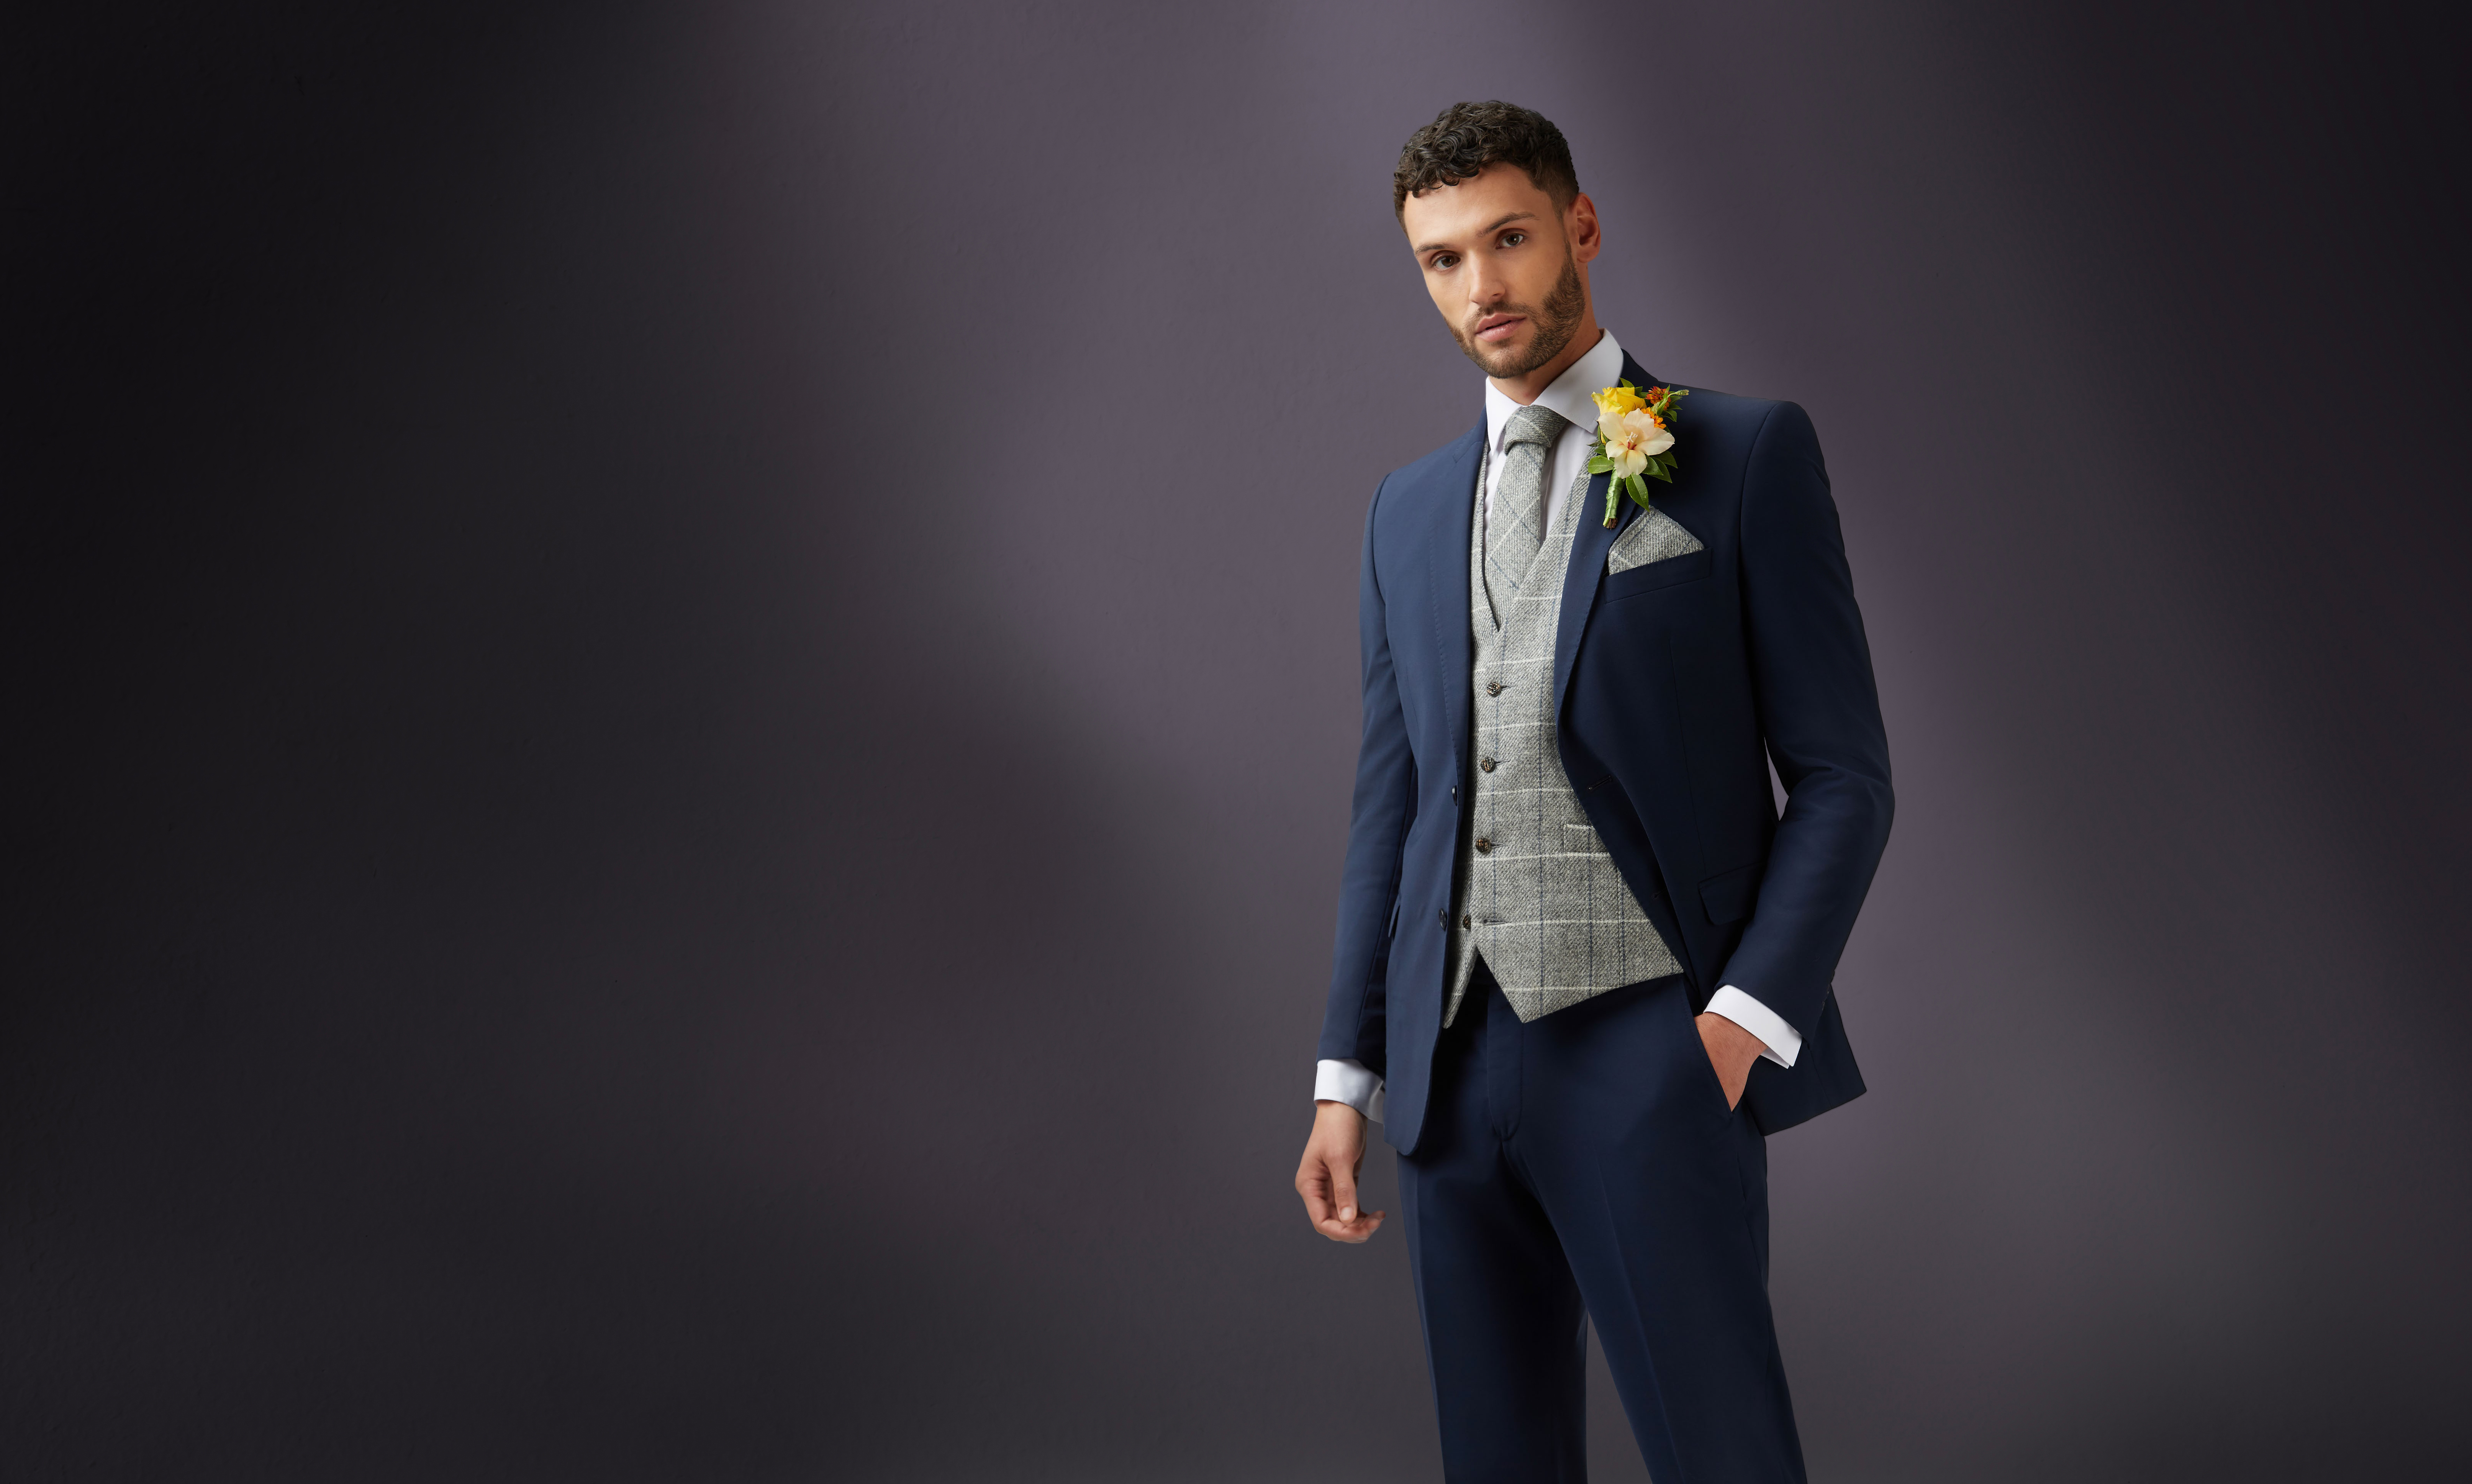 Suit Hire - Modern Suits . Suits From £55